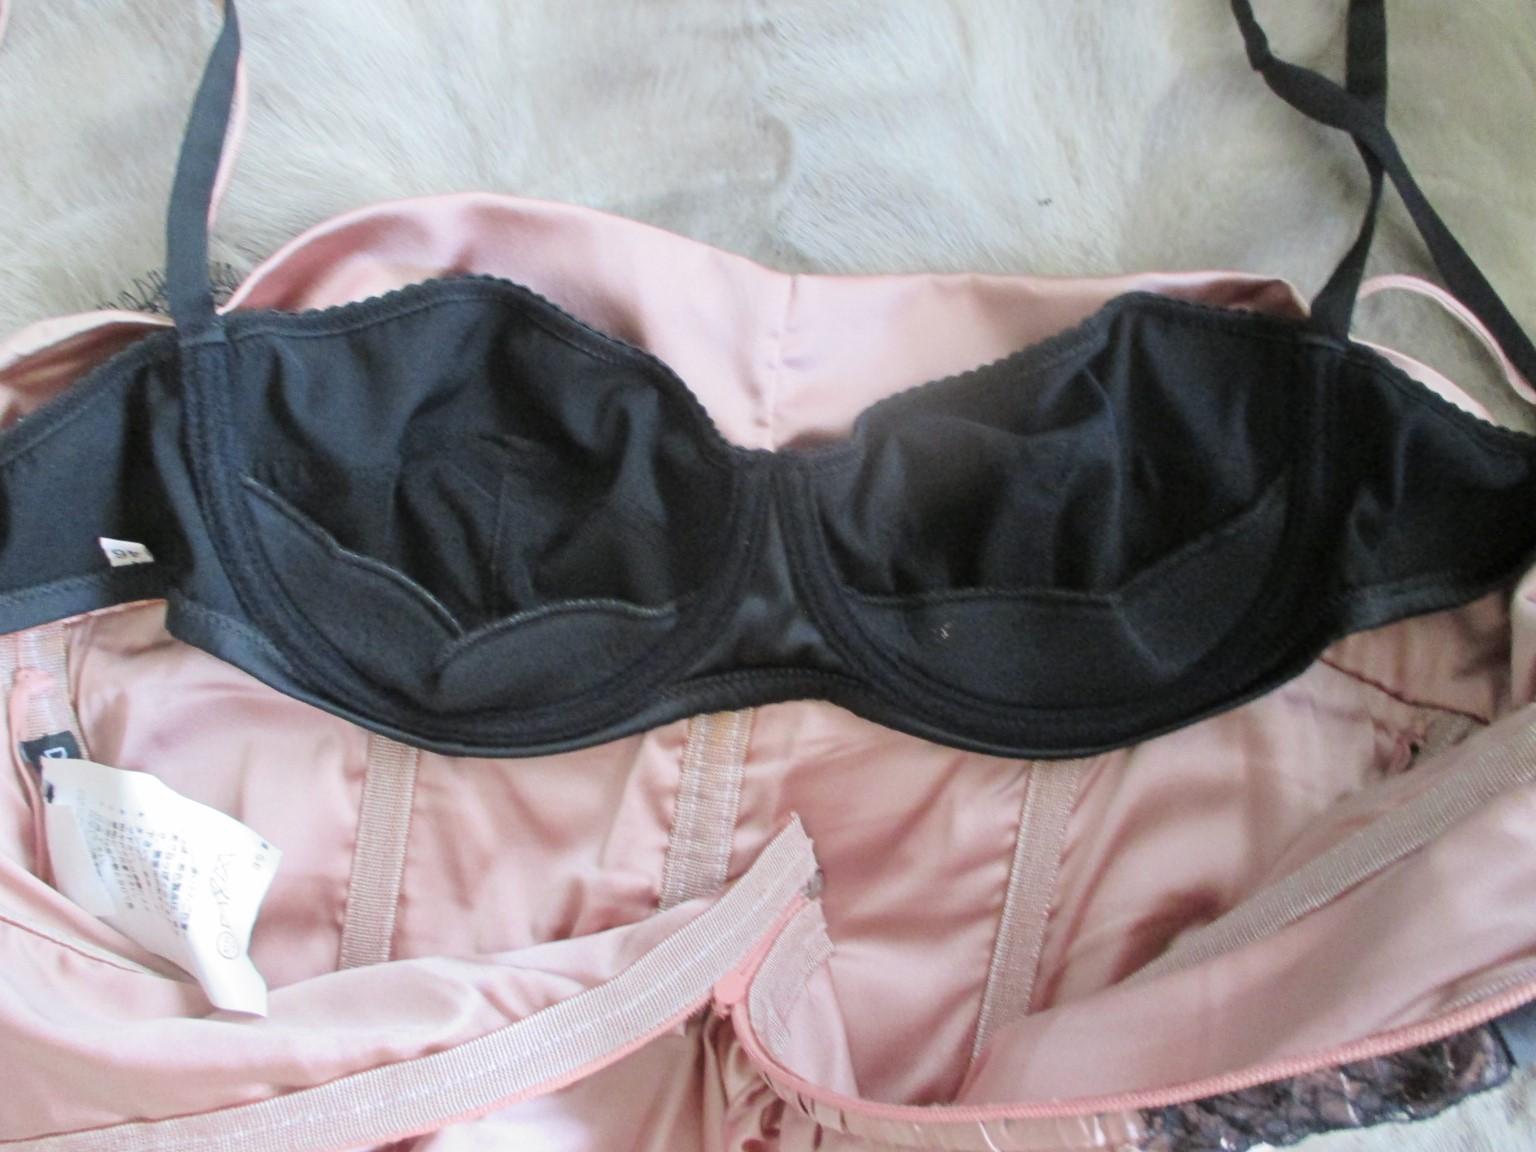 Dolce & Gabbana Black Silk Lace Corset Bustier Pink Top In Good Condition For Sale In Amsterdam, NL